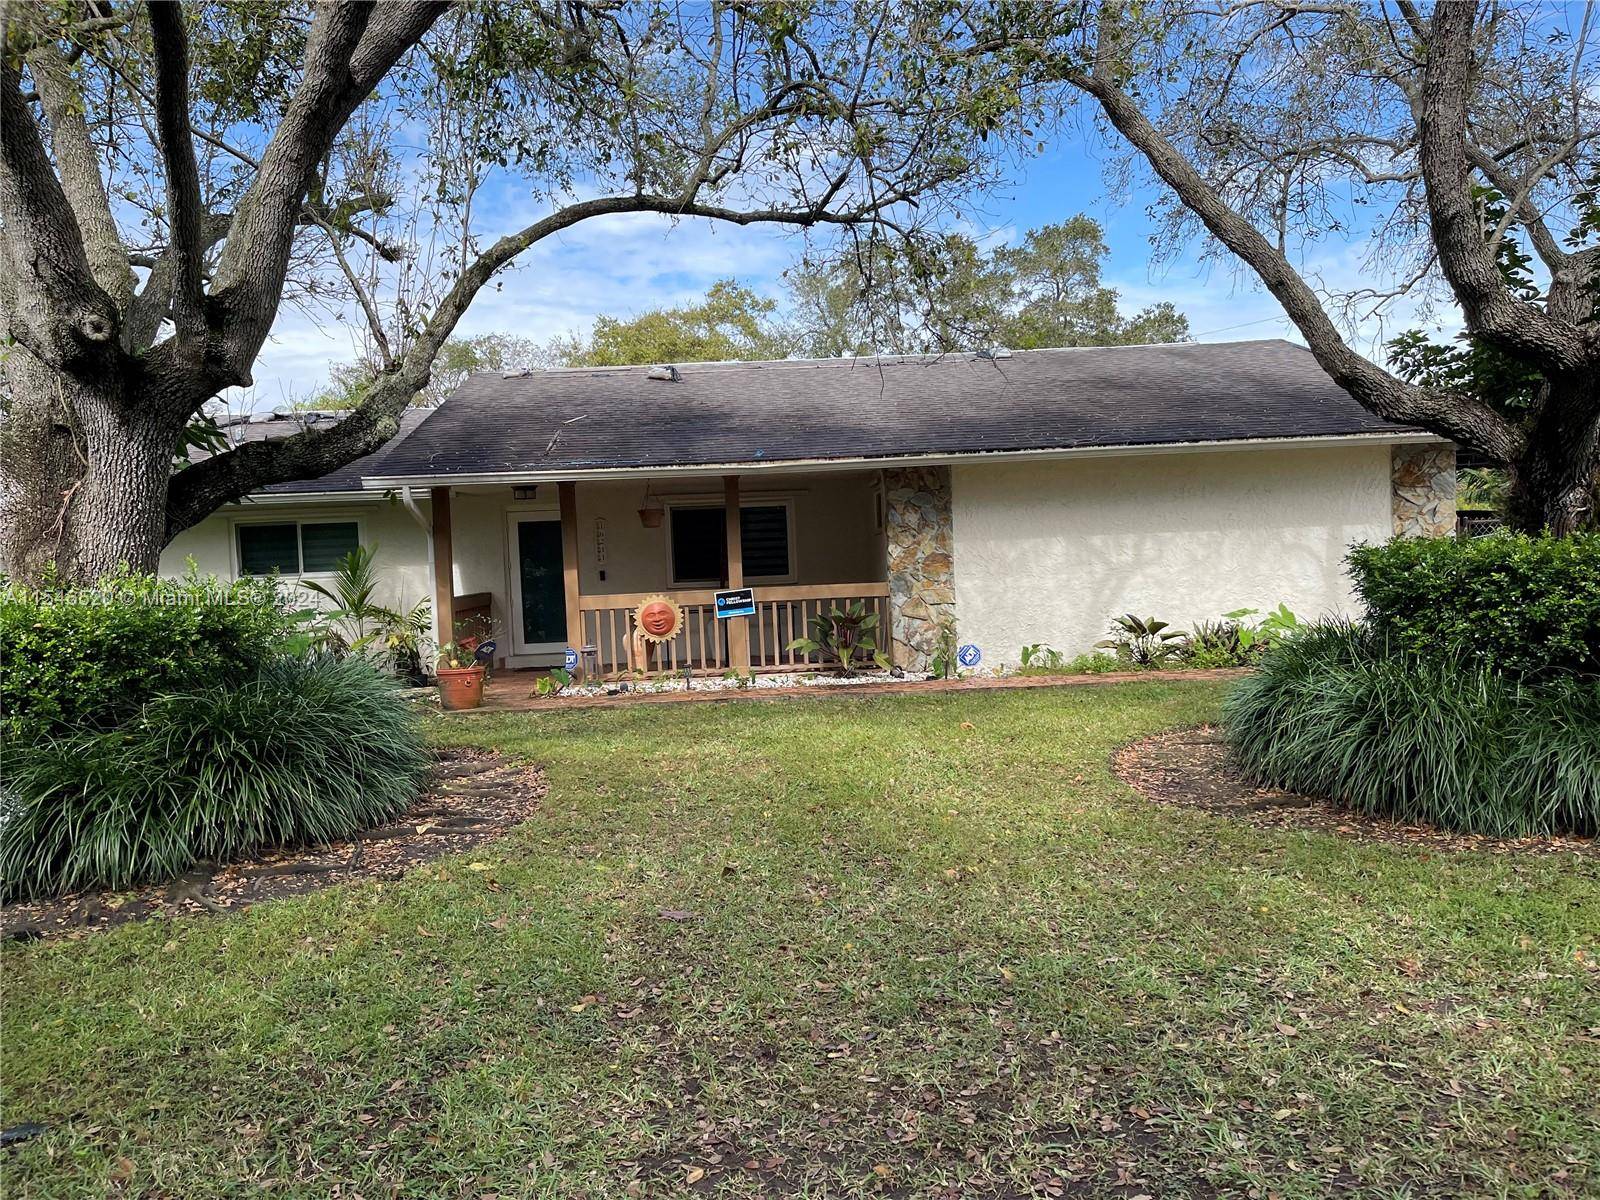 If looking for a peaceful place and still driving distance to everything, look no further this home is located nestled between Homestead and the Redlands.